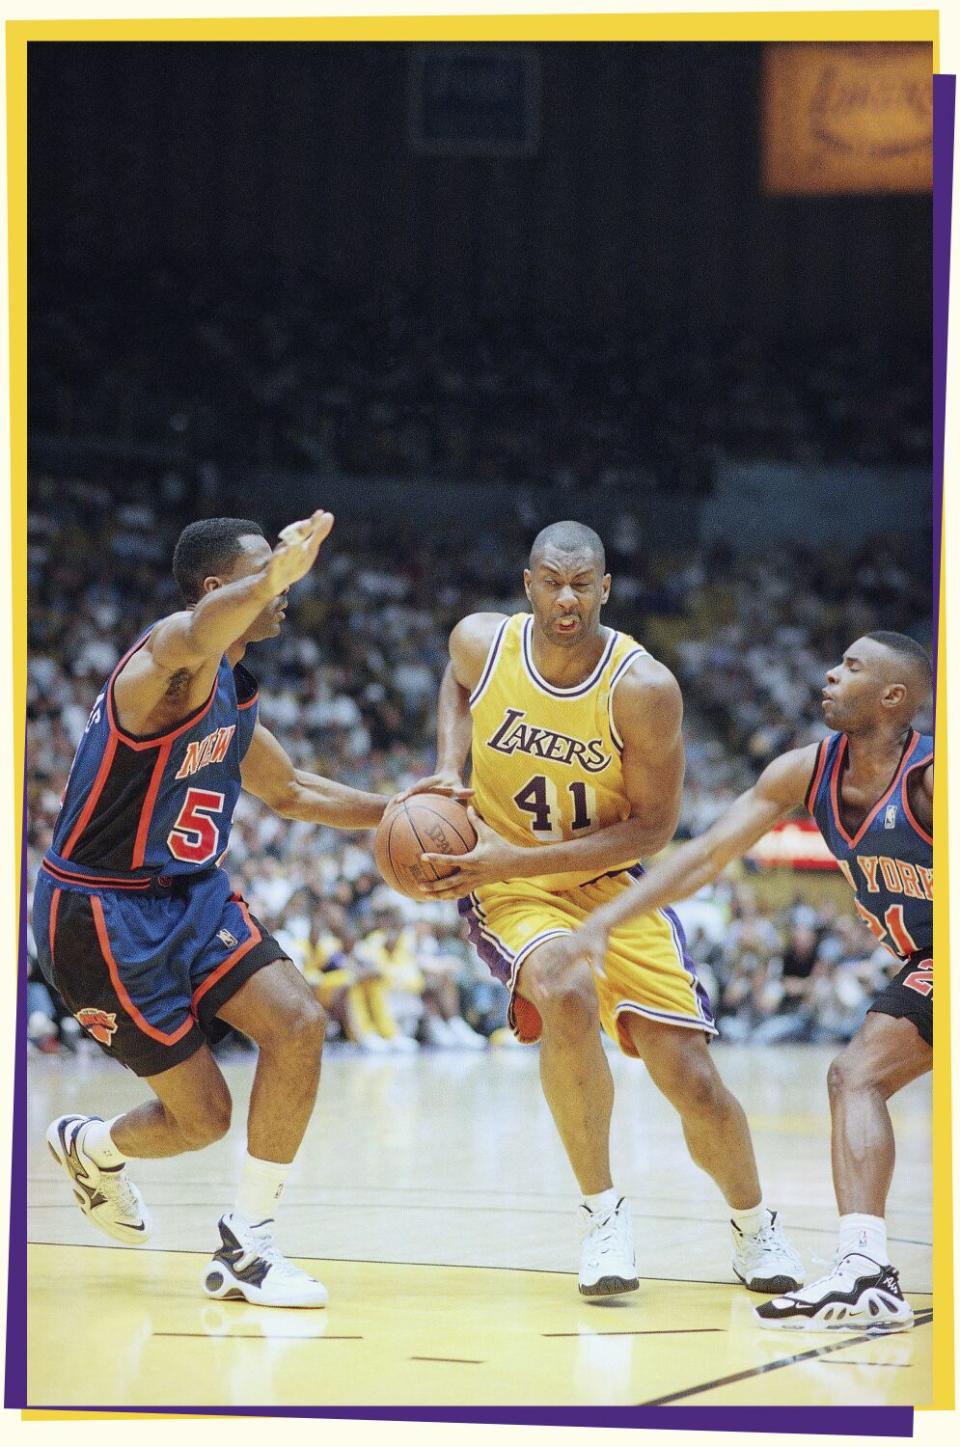 Photo of a player in a Lakers jersey dribbling the ball through two opponents.